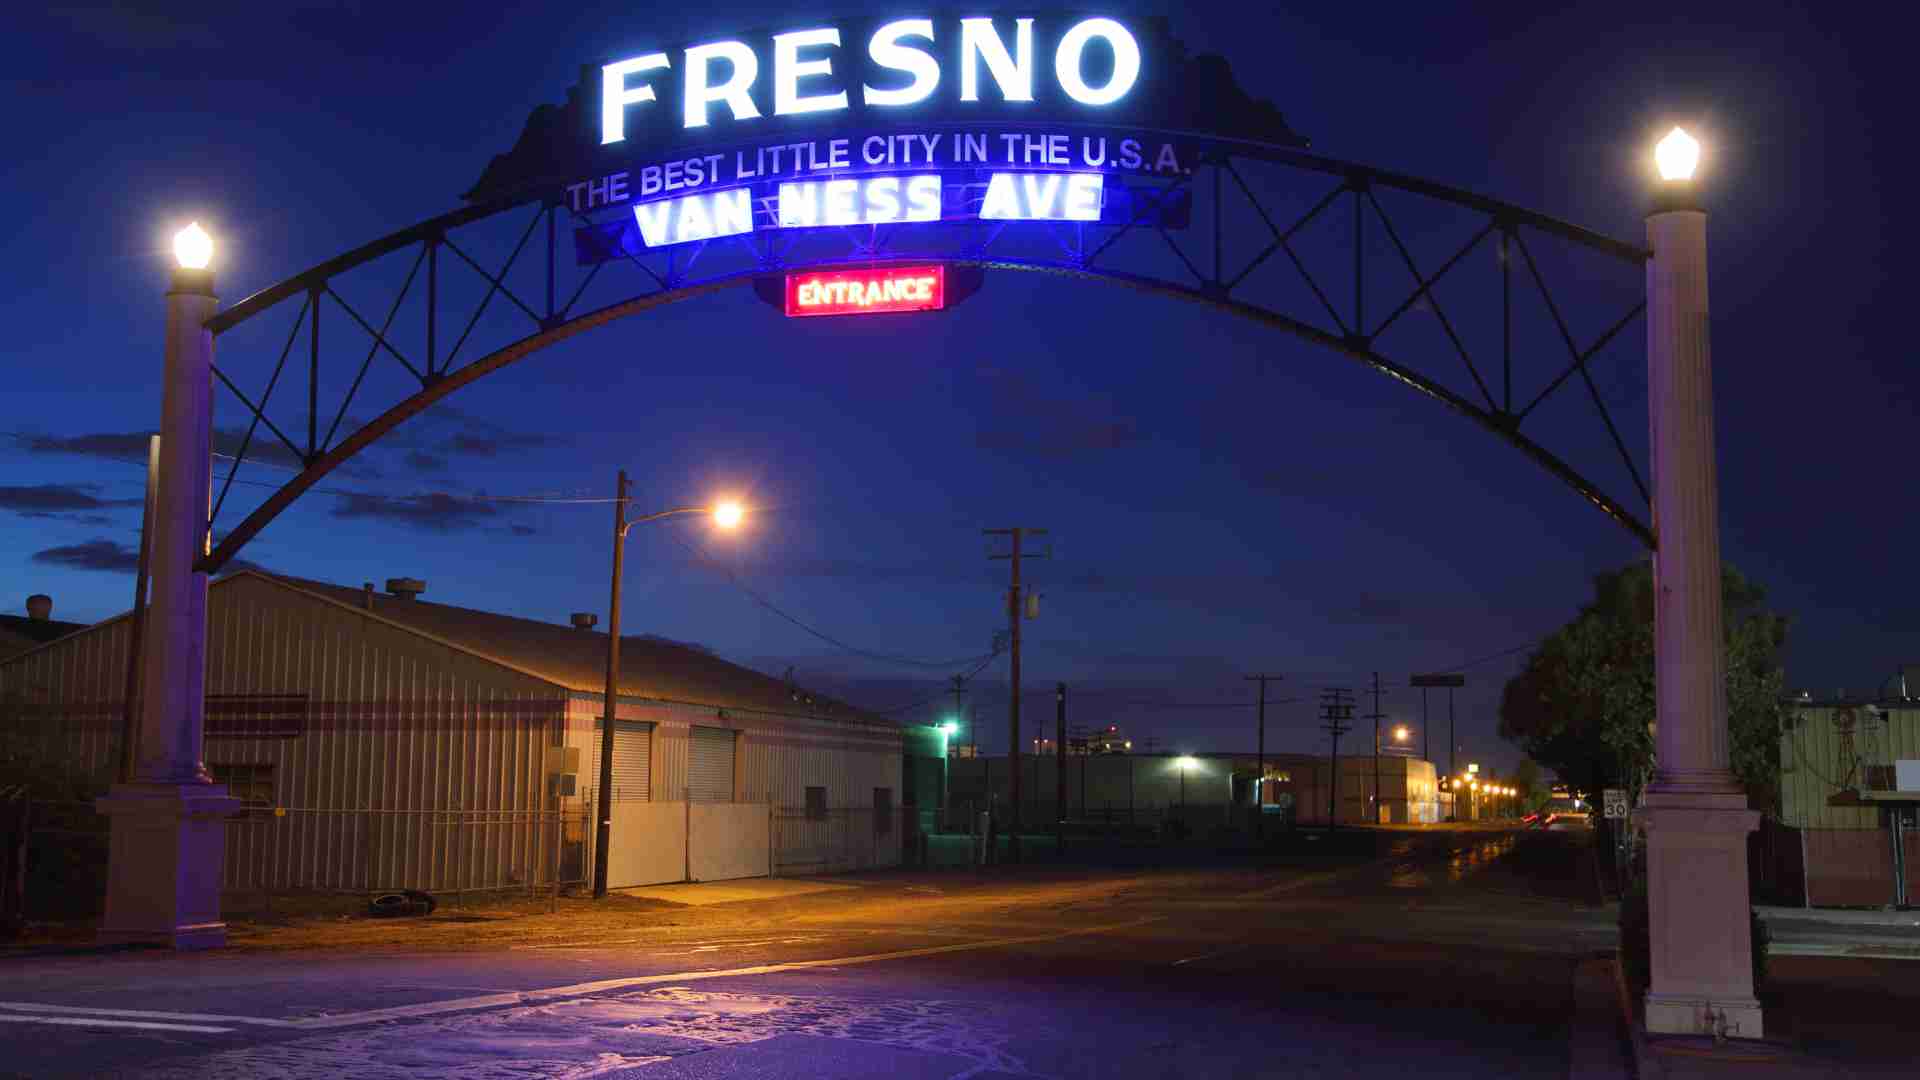 A basic income for 150 recipients will be available in fresno County, California